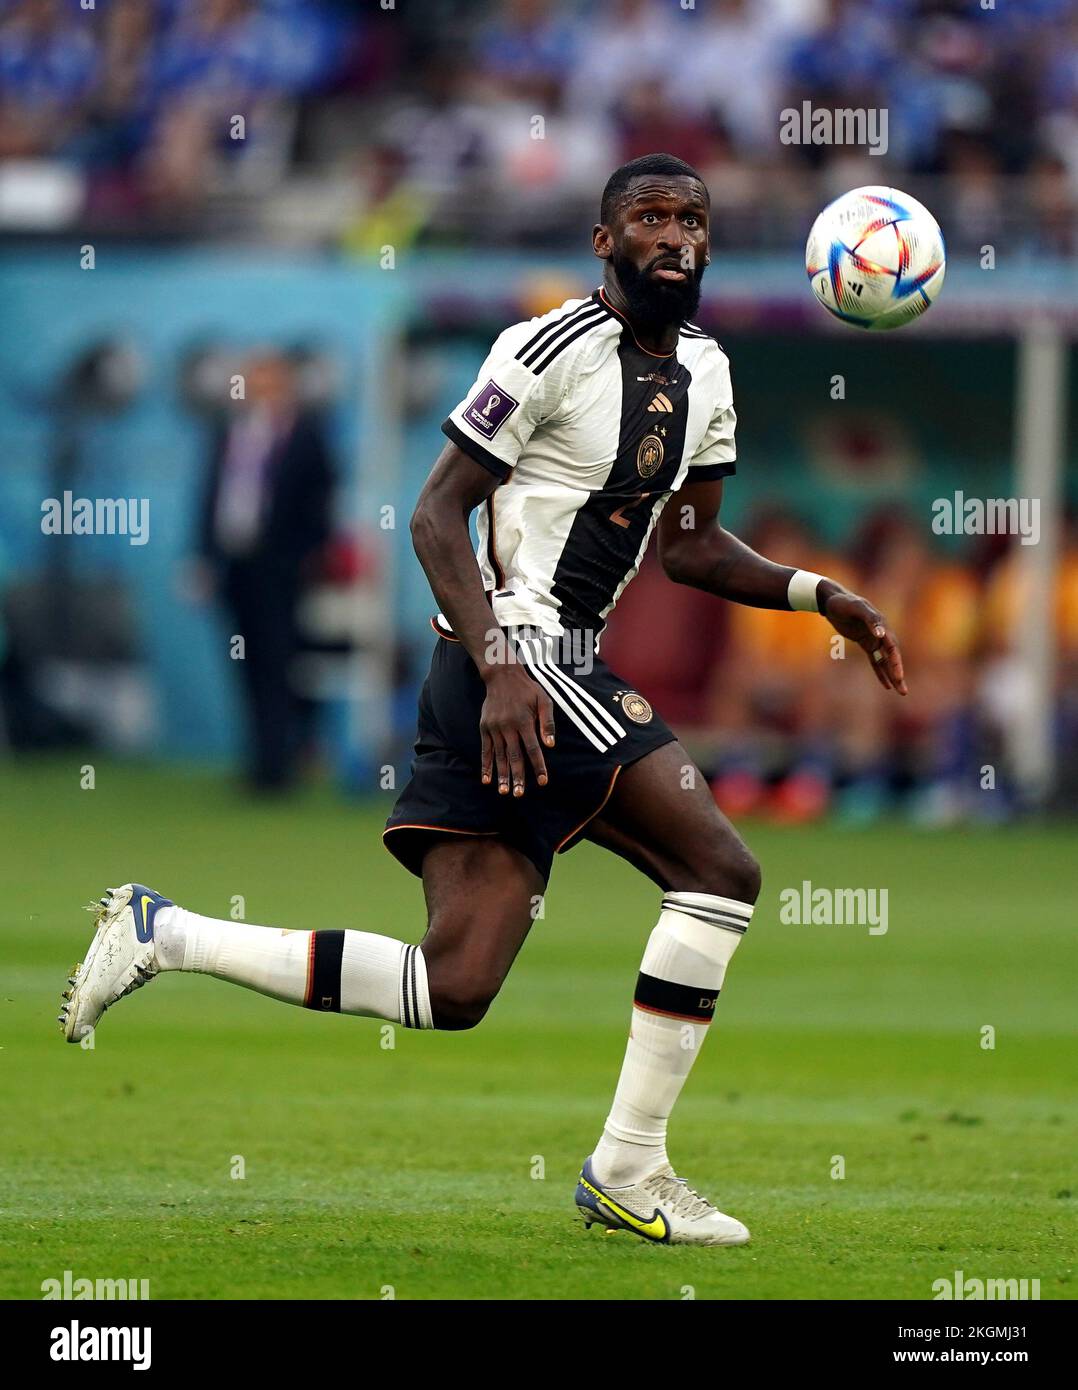 Germany's Antonio Rudiger during the FIFA World Cup Group E match at the Khalifa International Stadium, Doha. Picture date: Wednesday November 23, 2022. Stock Photo